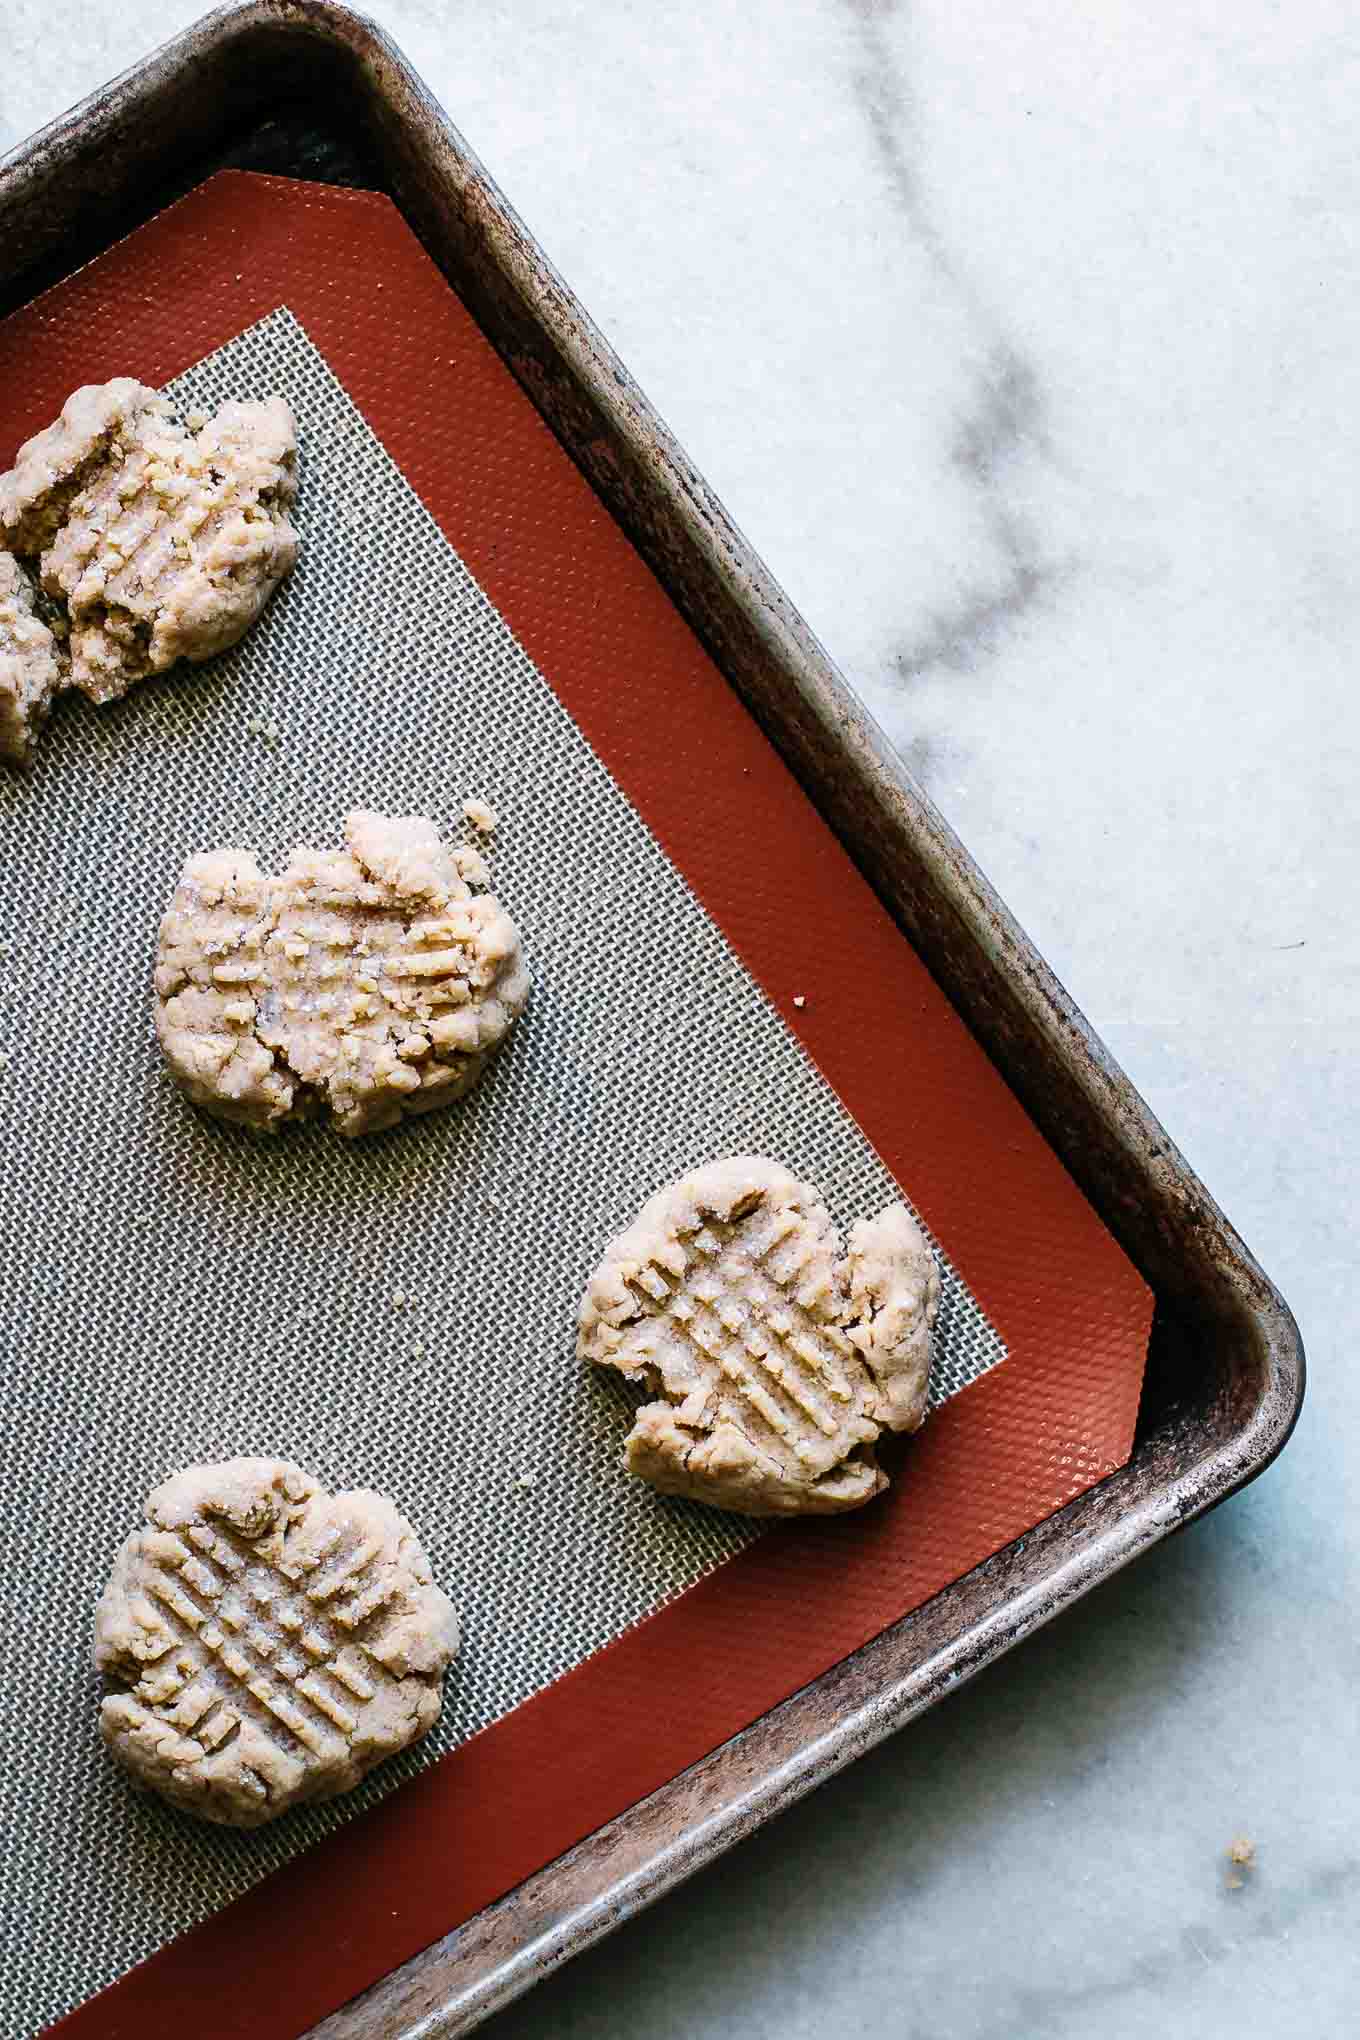 Are Silicone Baking Mats Eco-Friendly?